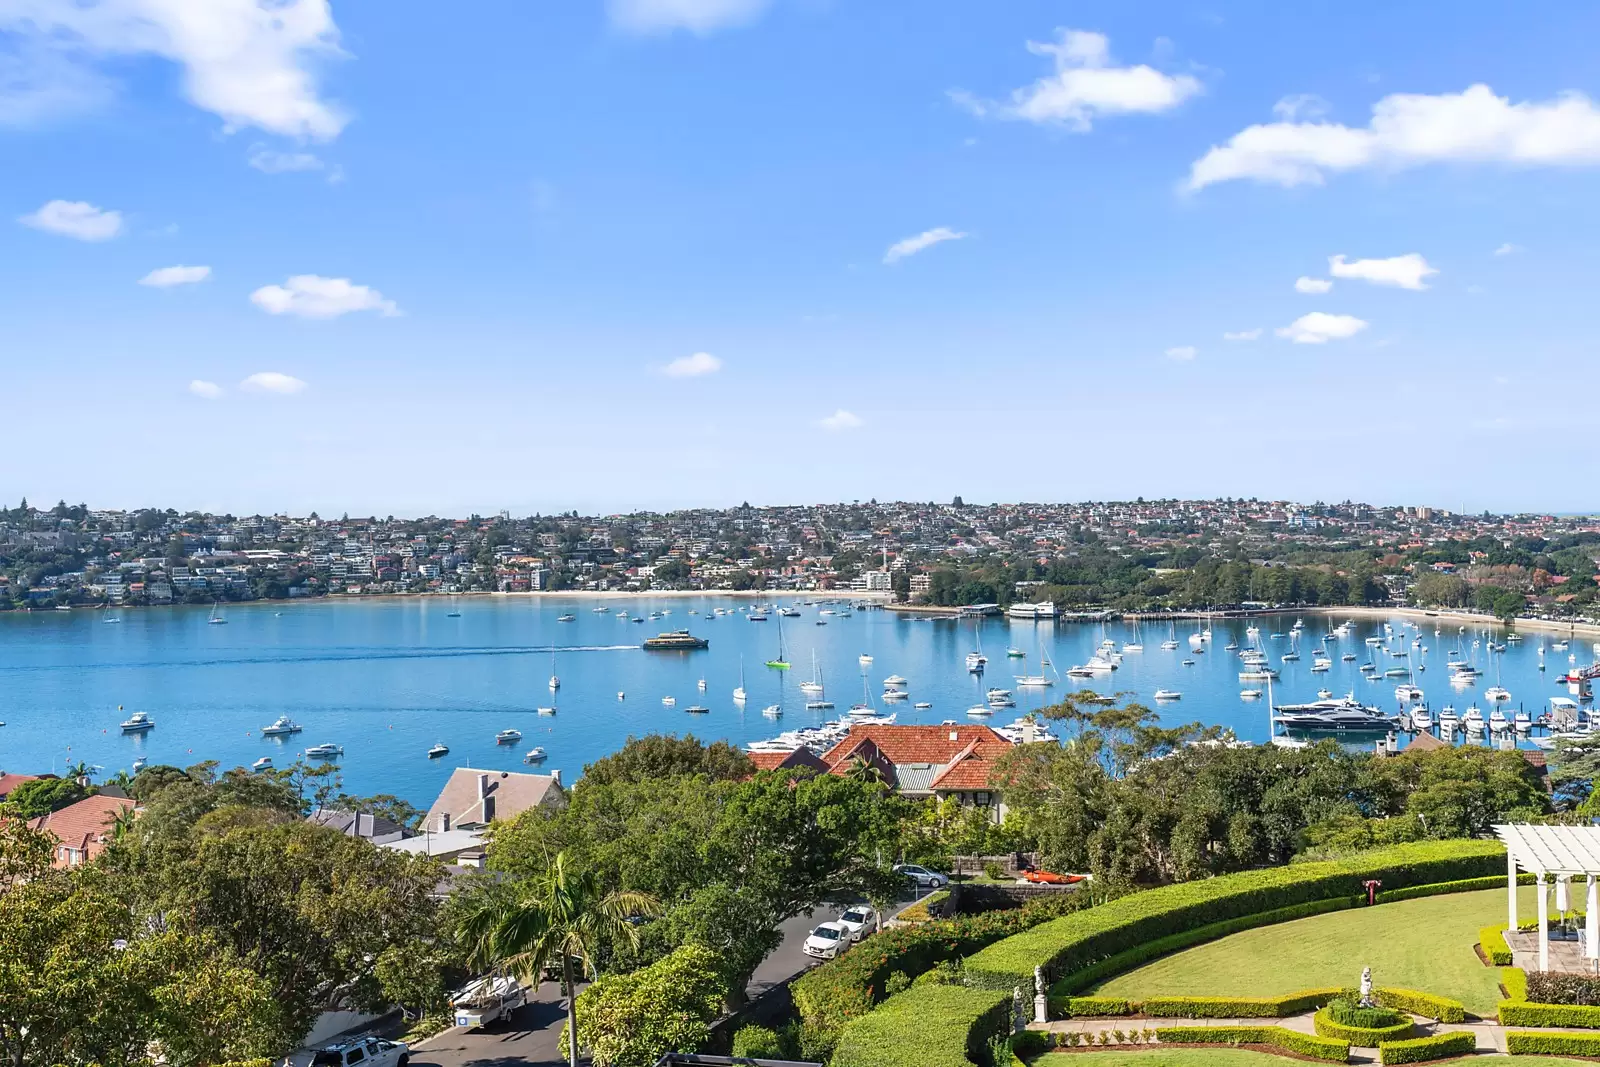 Photo #16: 13/8 Wentworth Street, Point Piper - Sold by Sydney Sotheby's International Realty